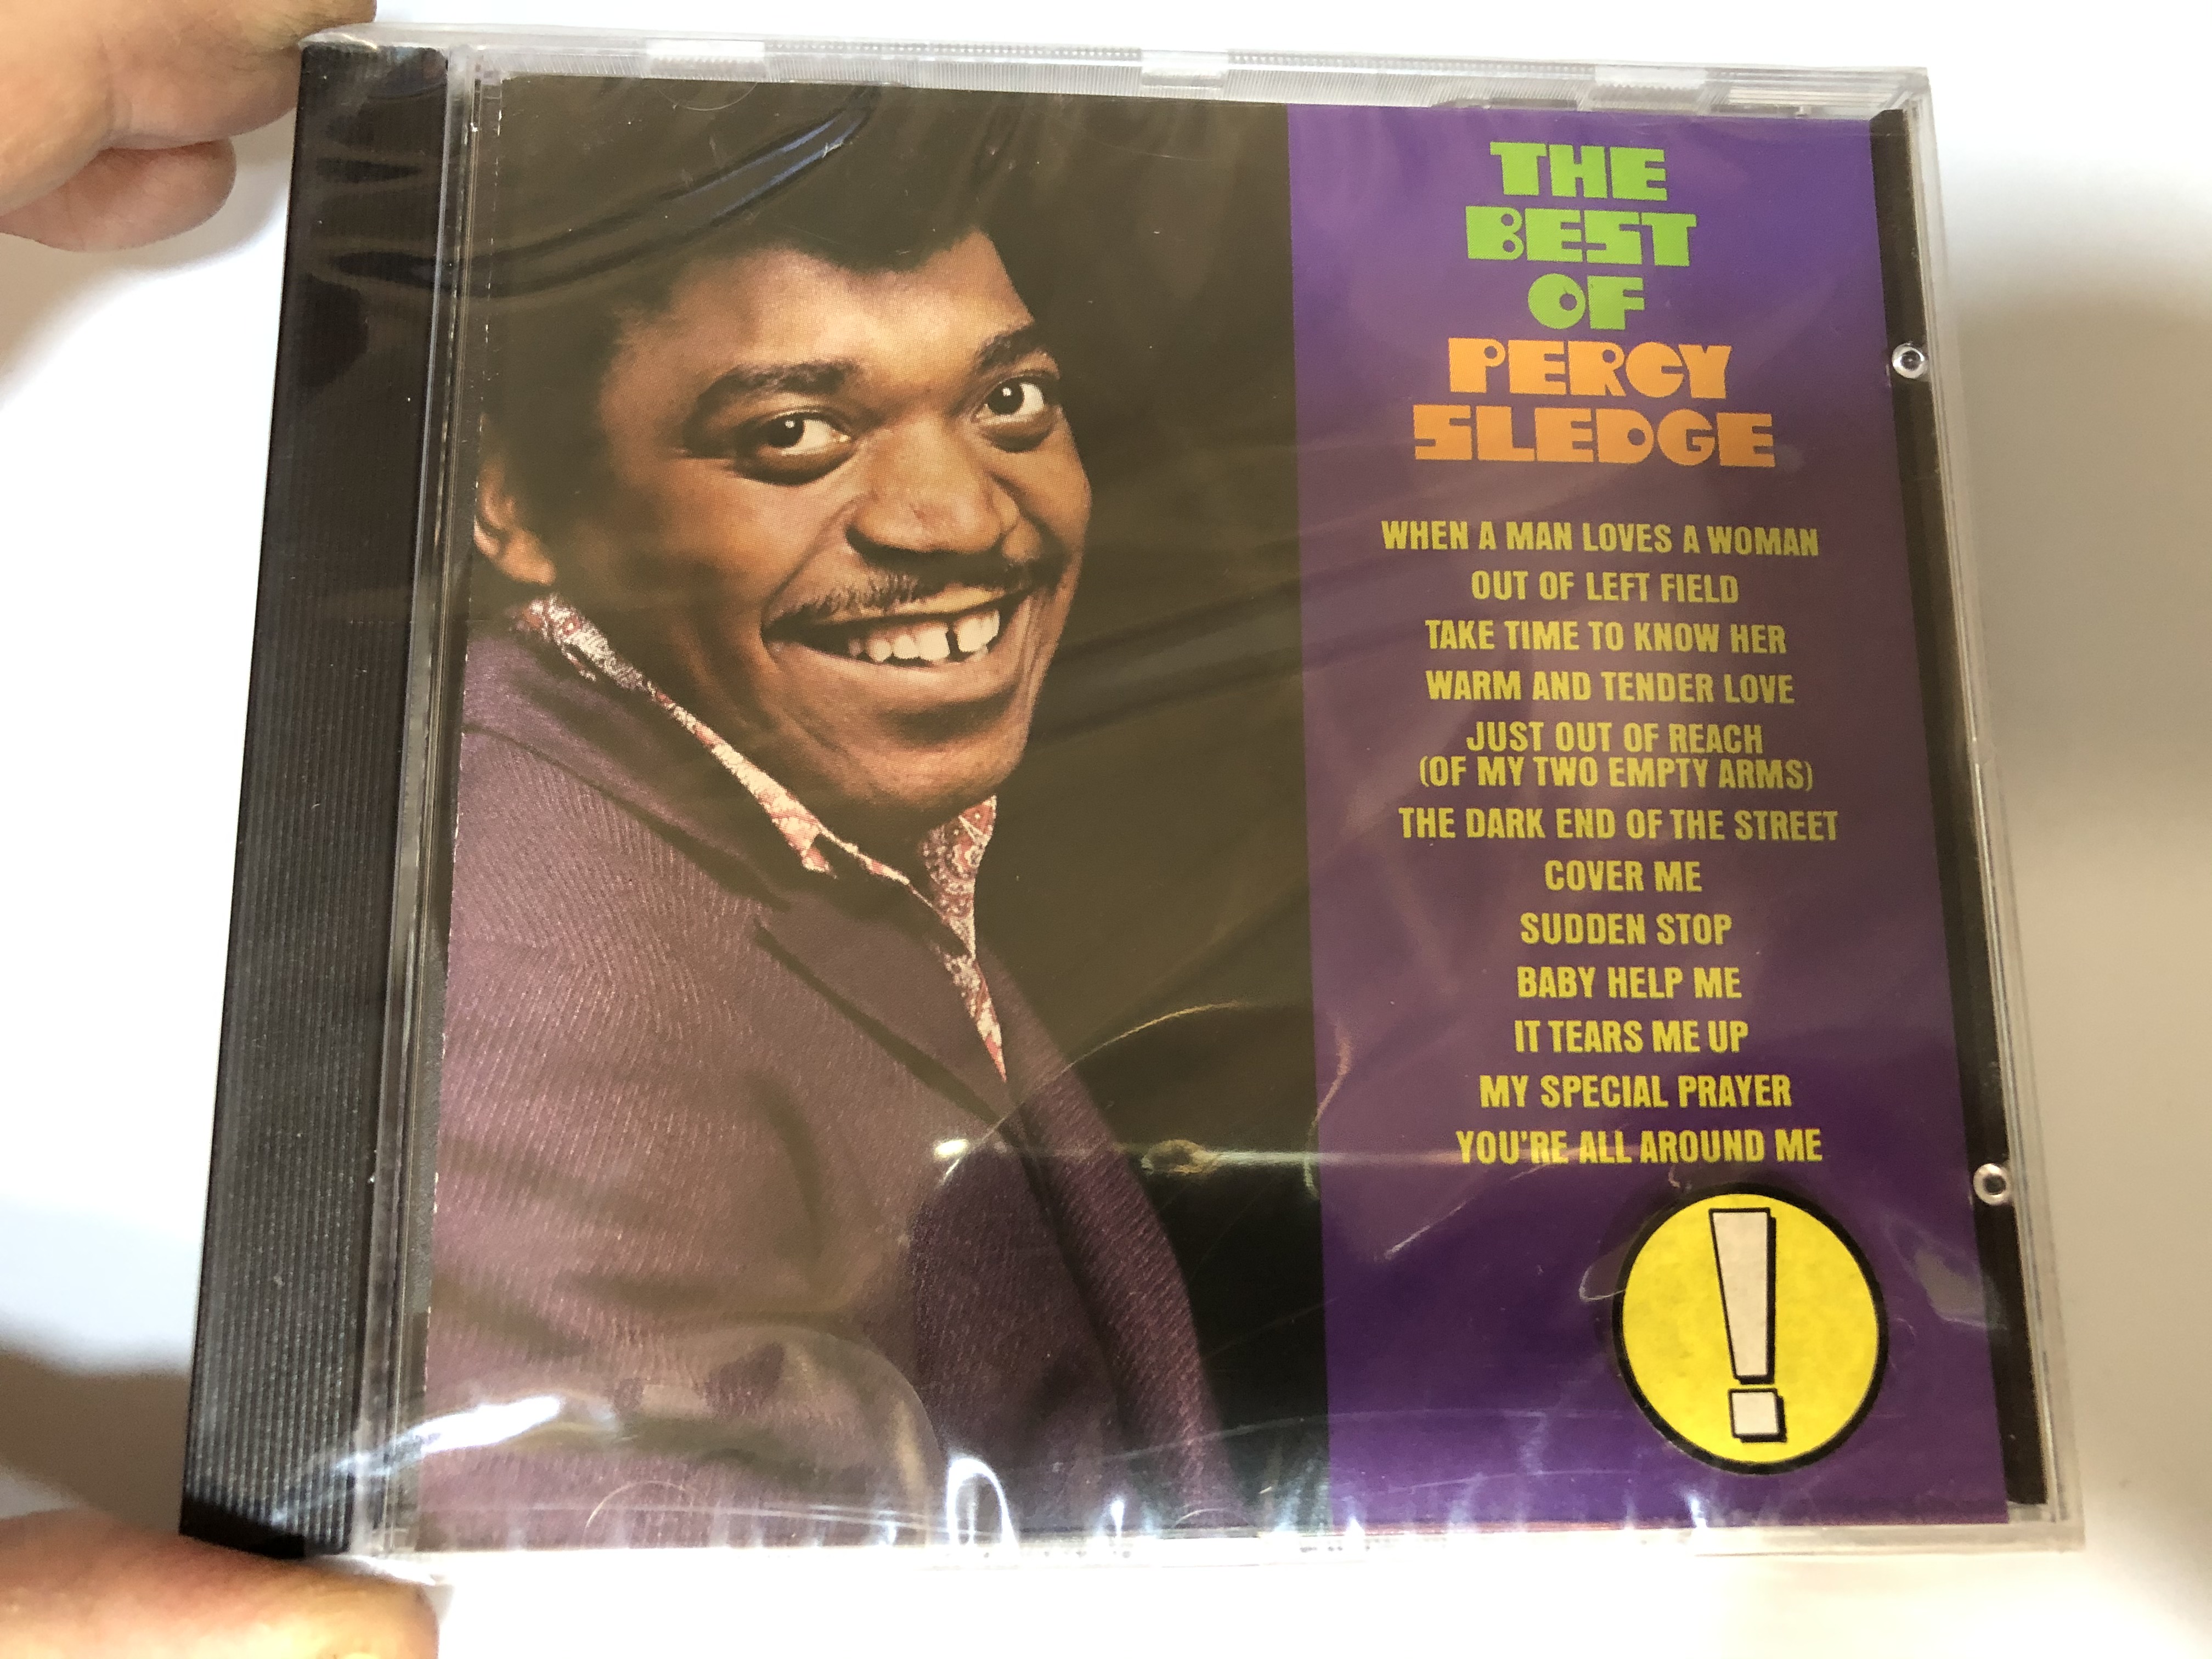 the-best-of-percy-sledge-when-a-man-loves-a-woman-out-of-left-field-take-time-to-know-her-warm-and-tender-love-just-out-of-reach-of-my-two-empty-arms-the-dark-end-of-the-street-cover-1-.jpg